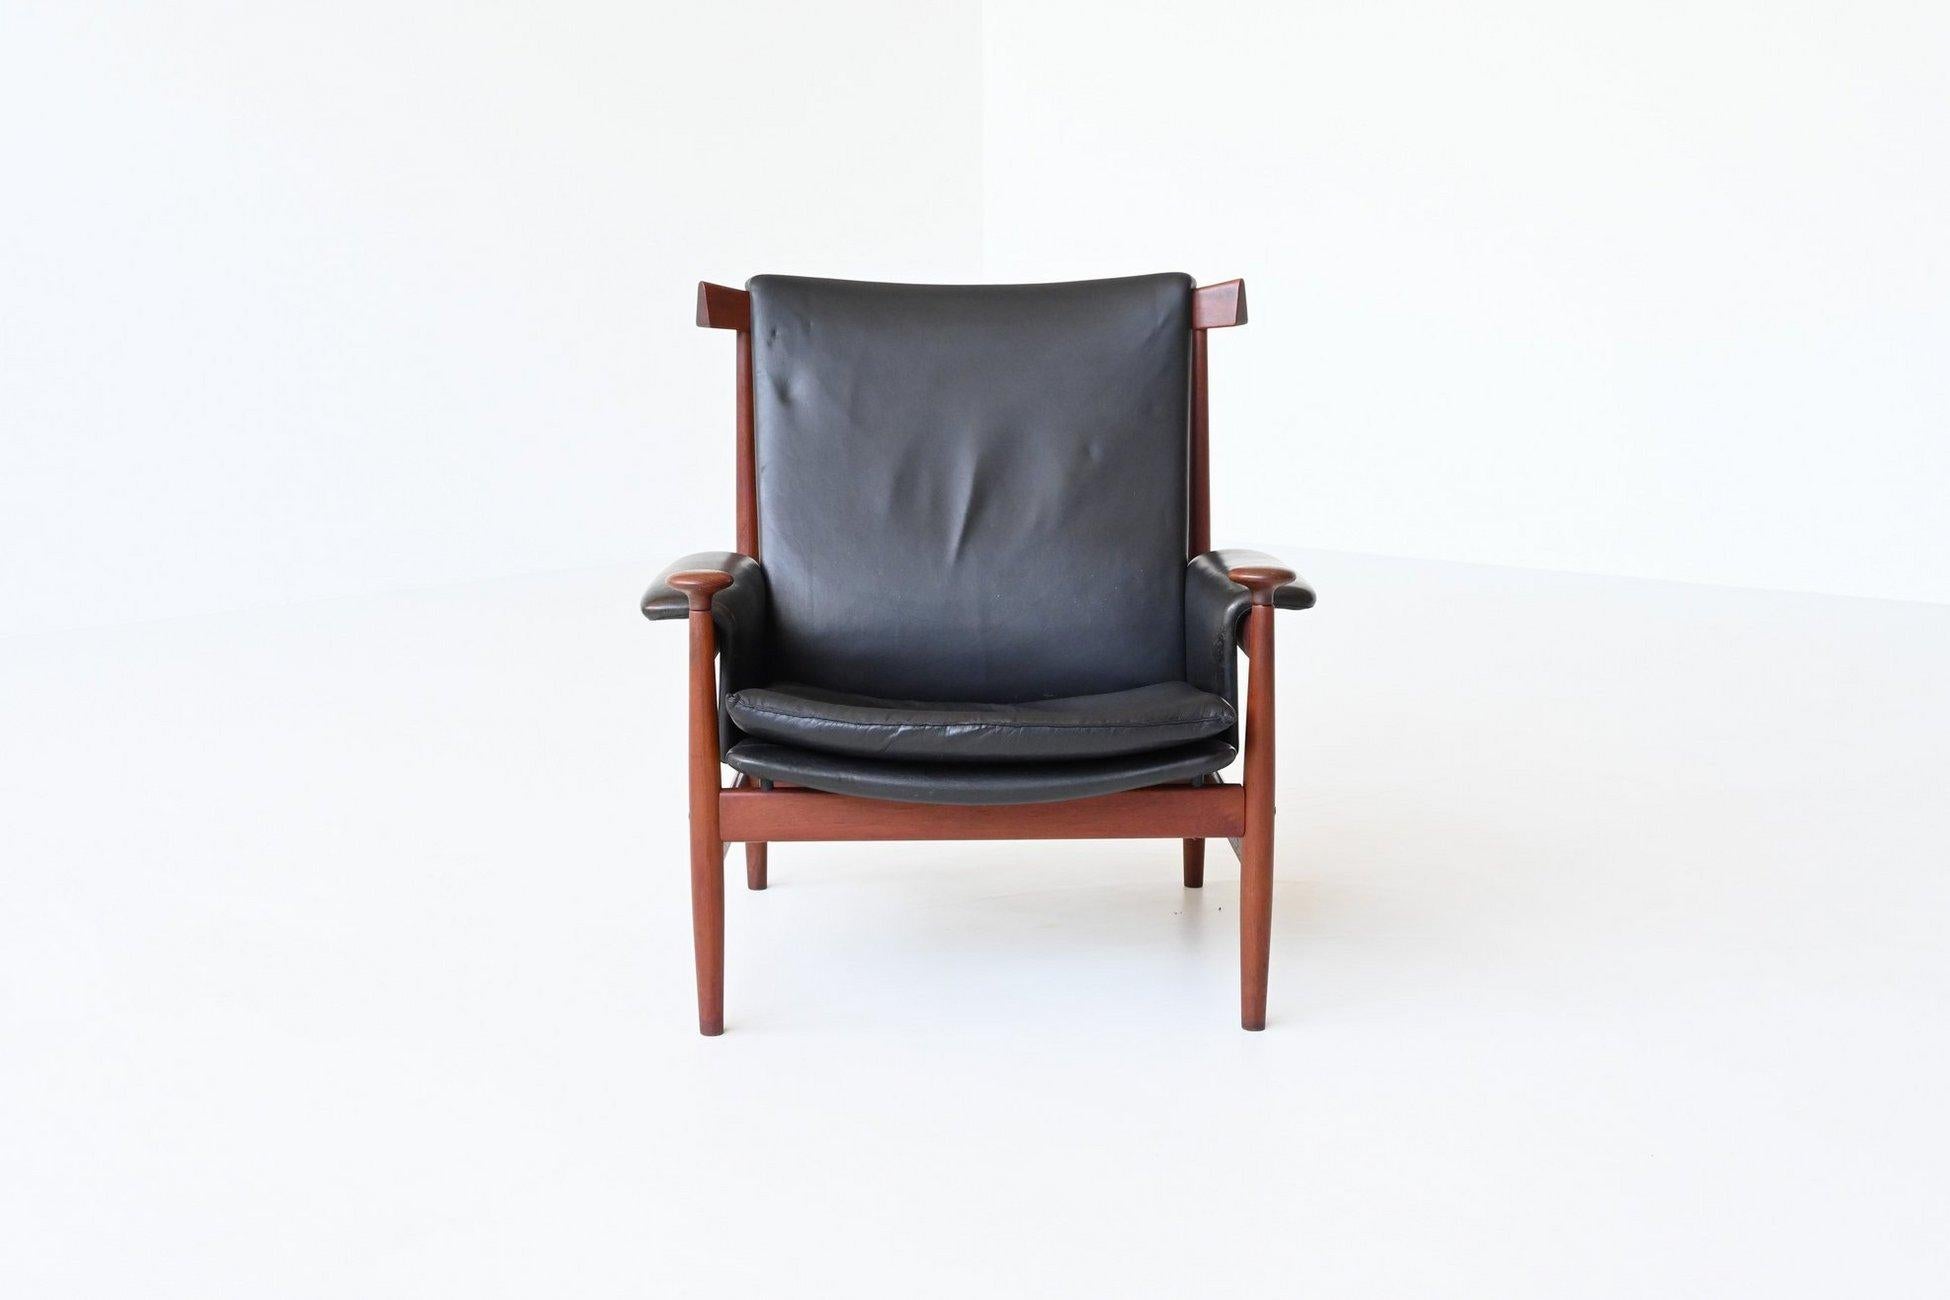 Stunning and very rare lounge chair “Bwana” model 152 designed by Finn Juhl for France & Son, Denmark 1962. It was originally intended as a kind of updated 